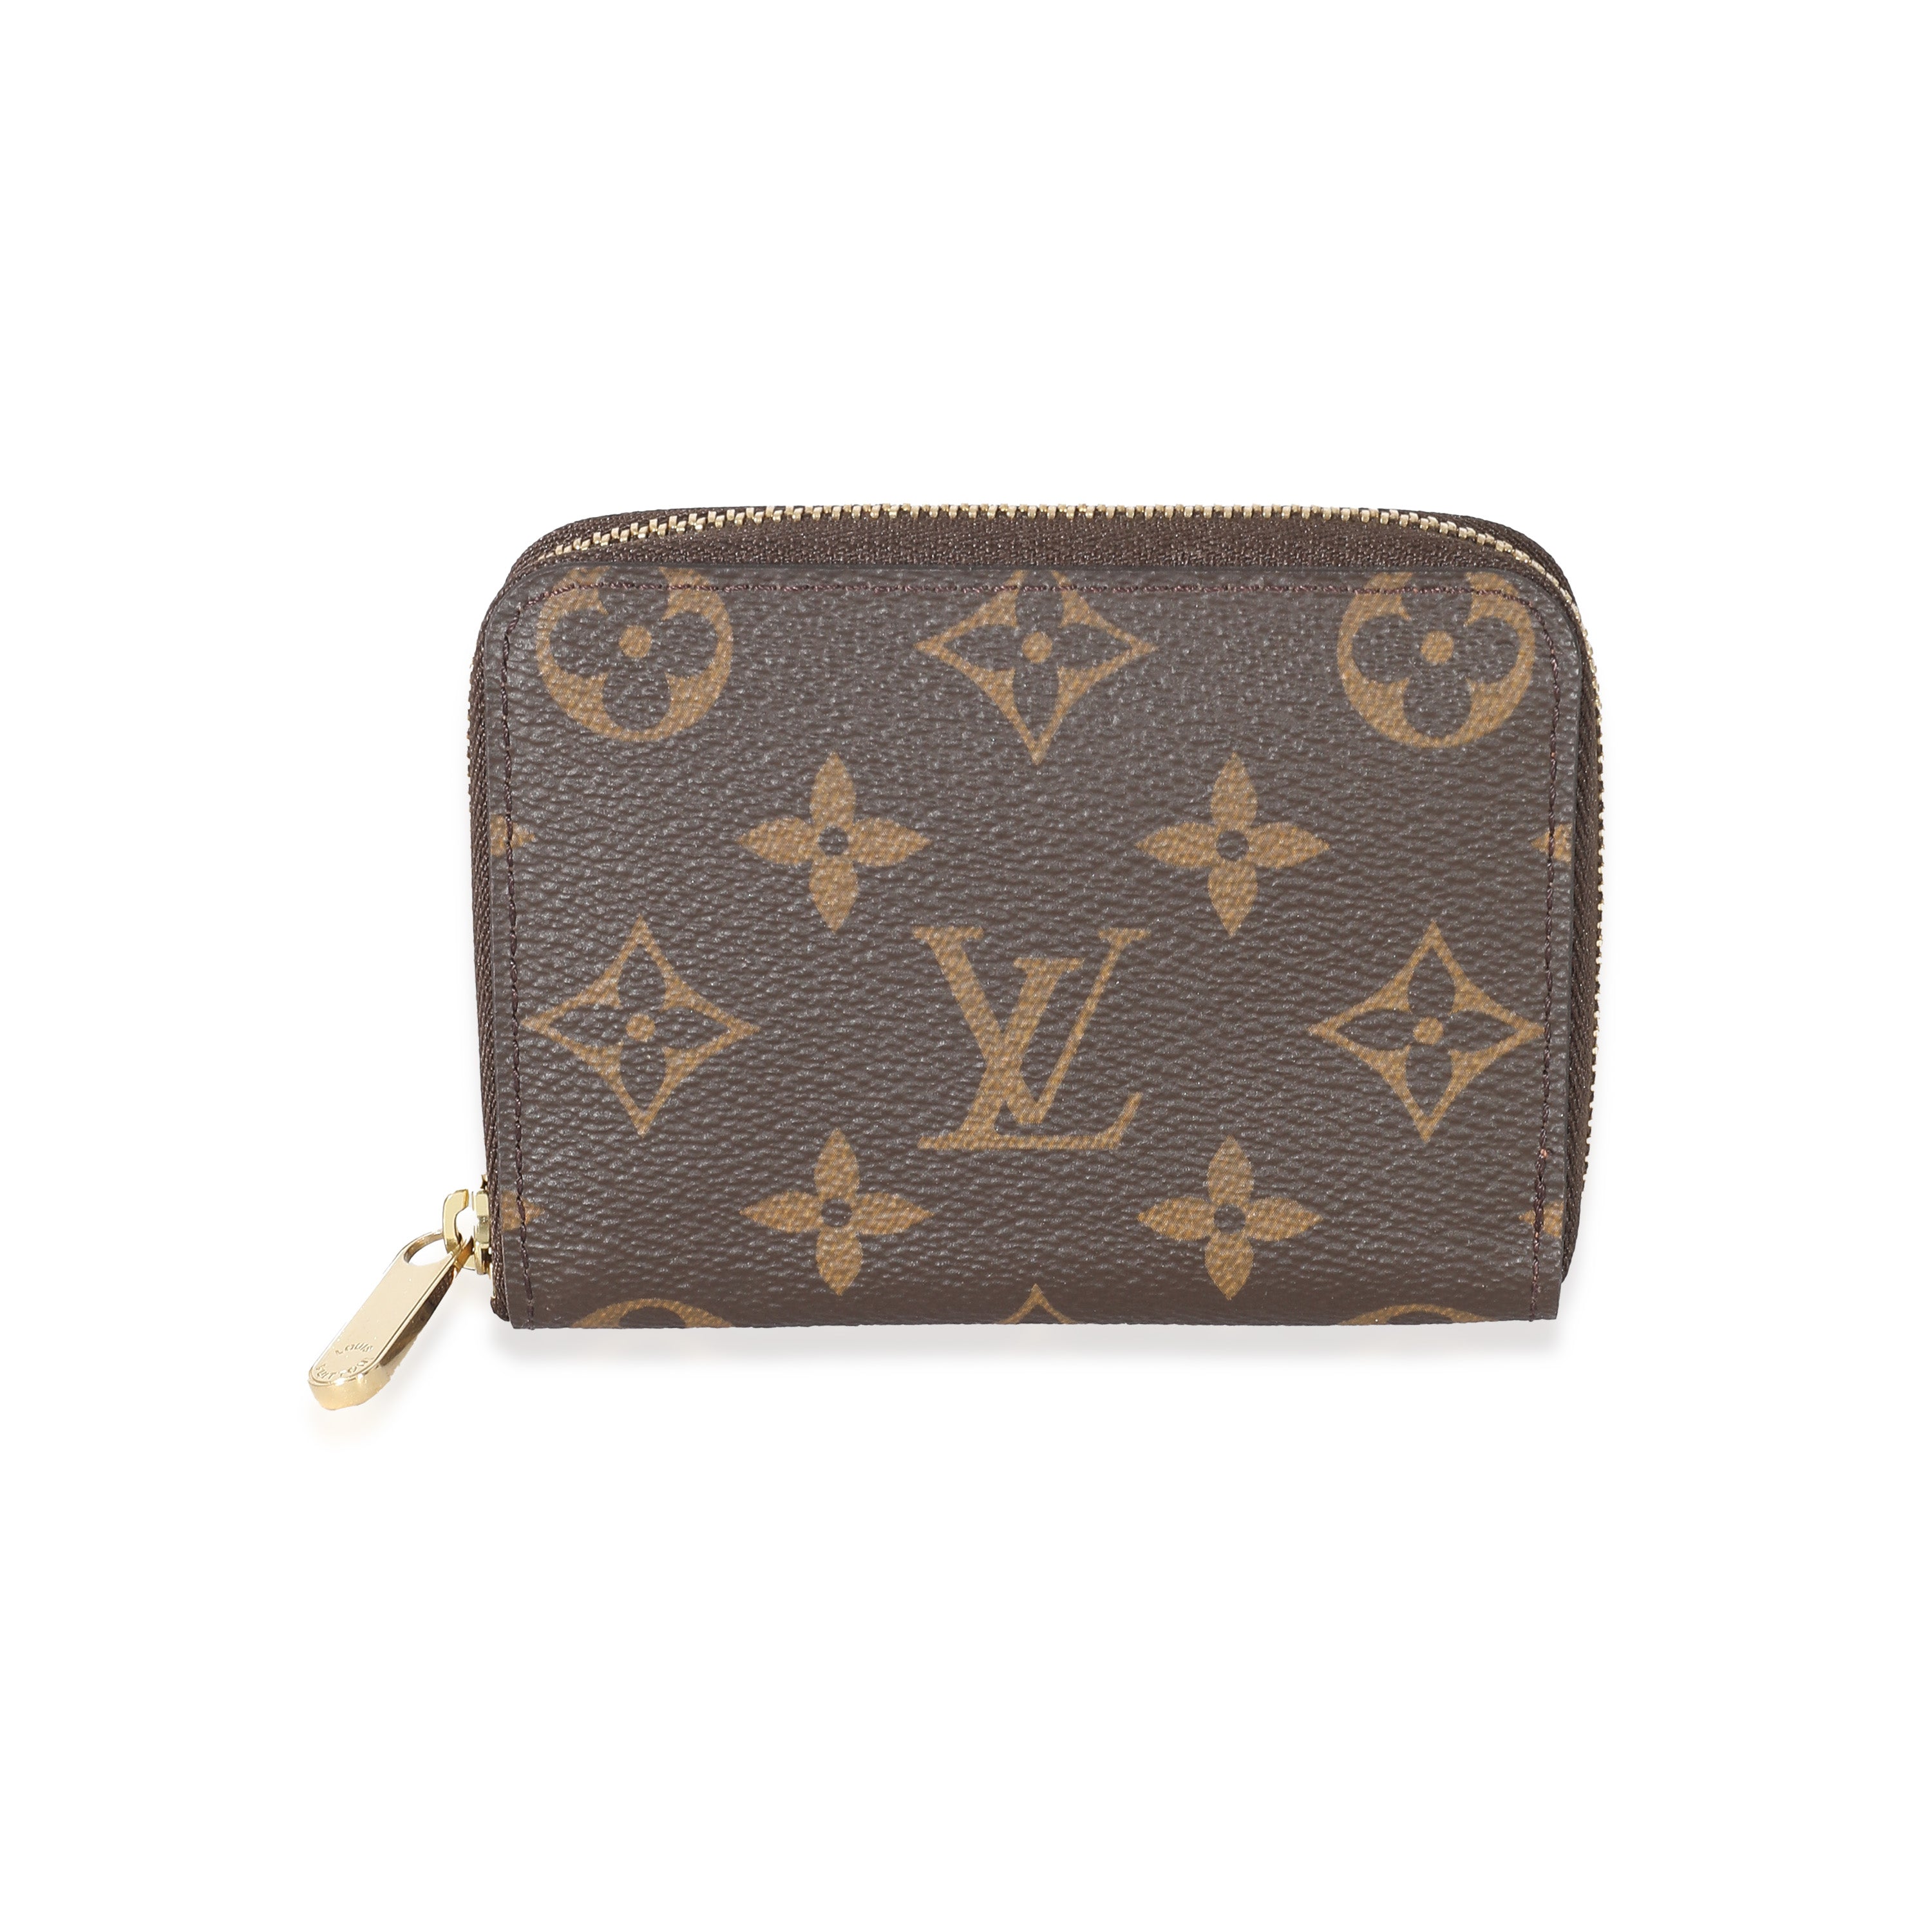 My First Louis Vuitton Purchase! Was it worth it?? Zippy Coin